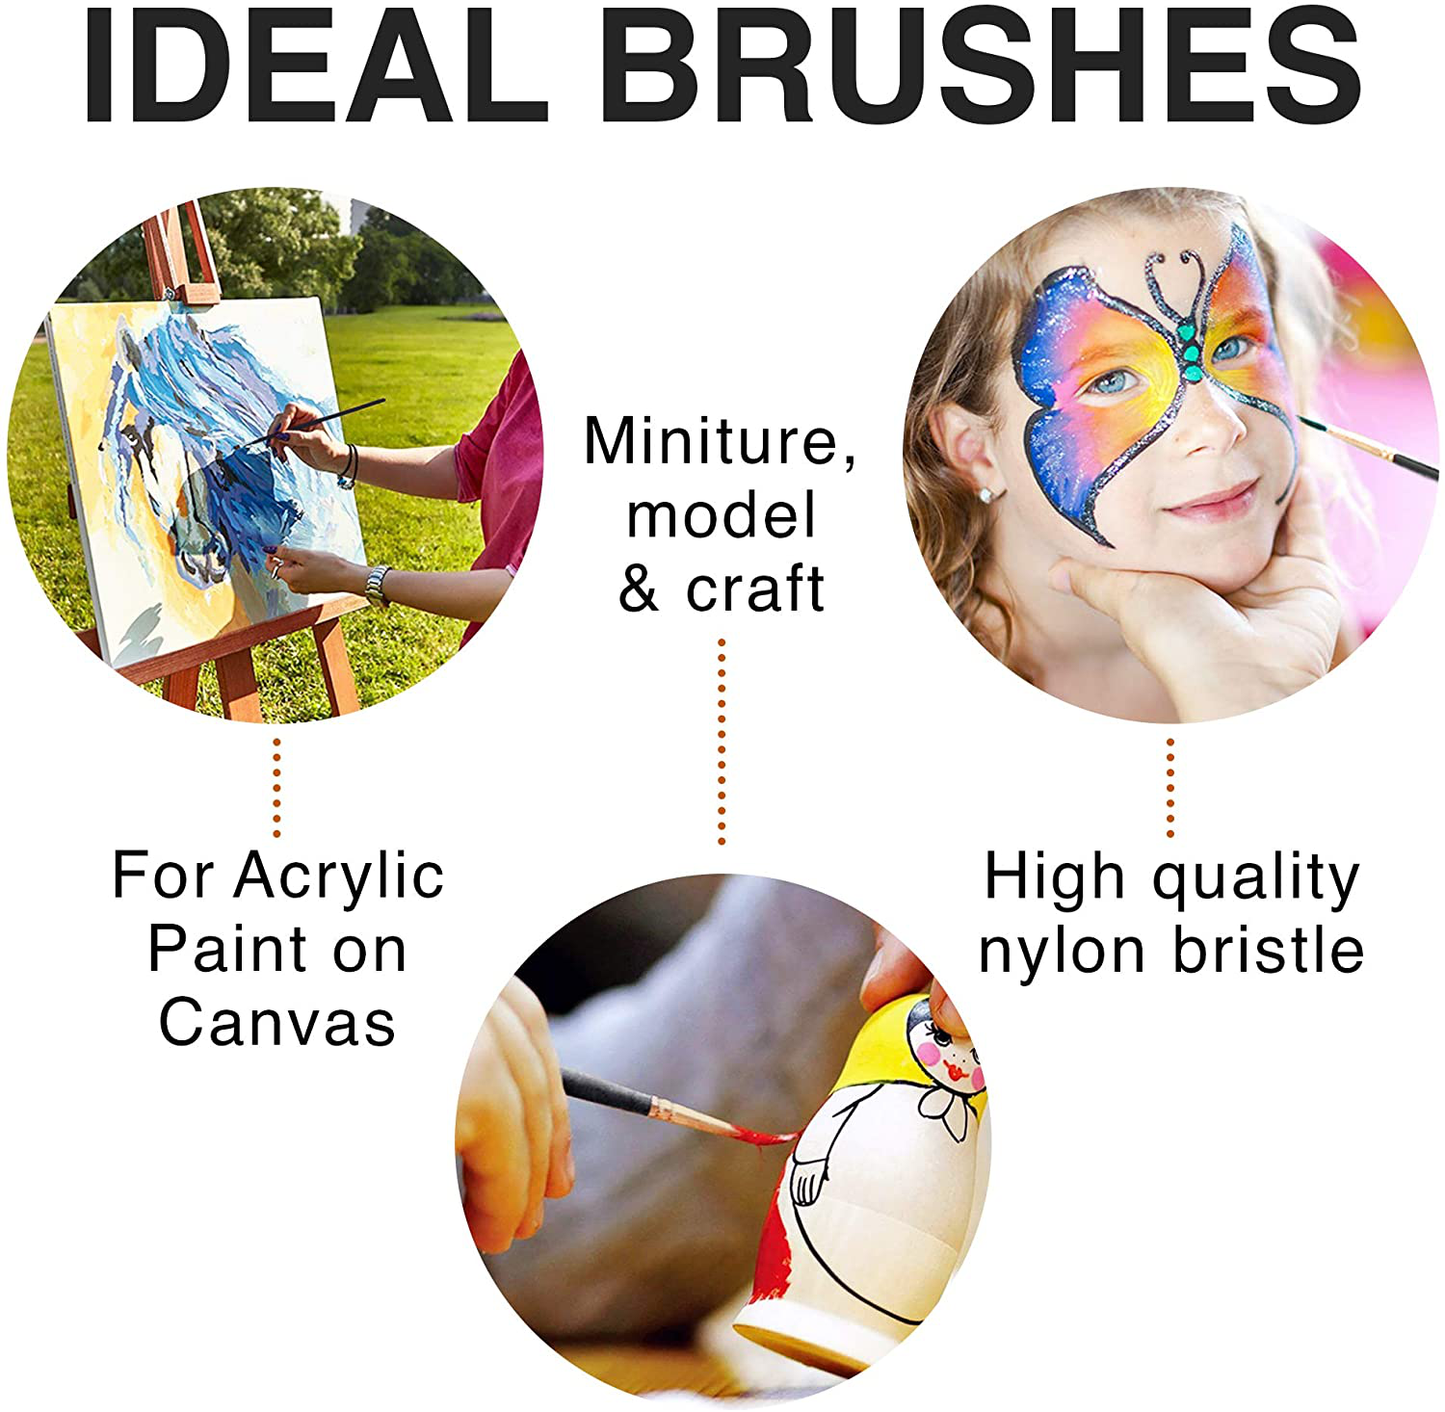 Professional Artist Paint Brush Set of 12 - Painting Brushes Kit for Kids, Adults Fabulous for Canvas, Watercolor & Fabric